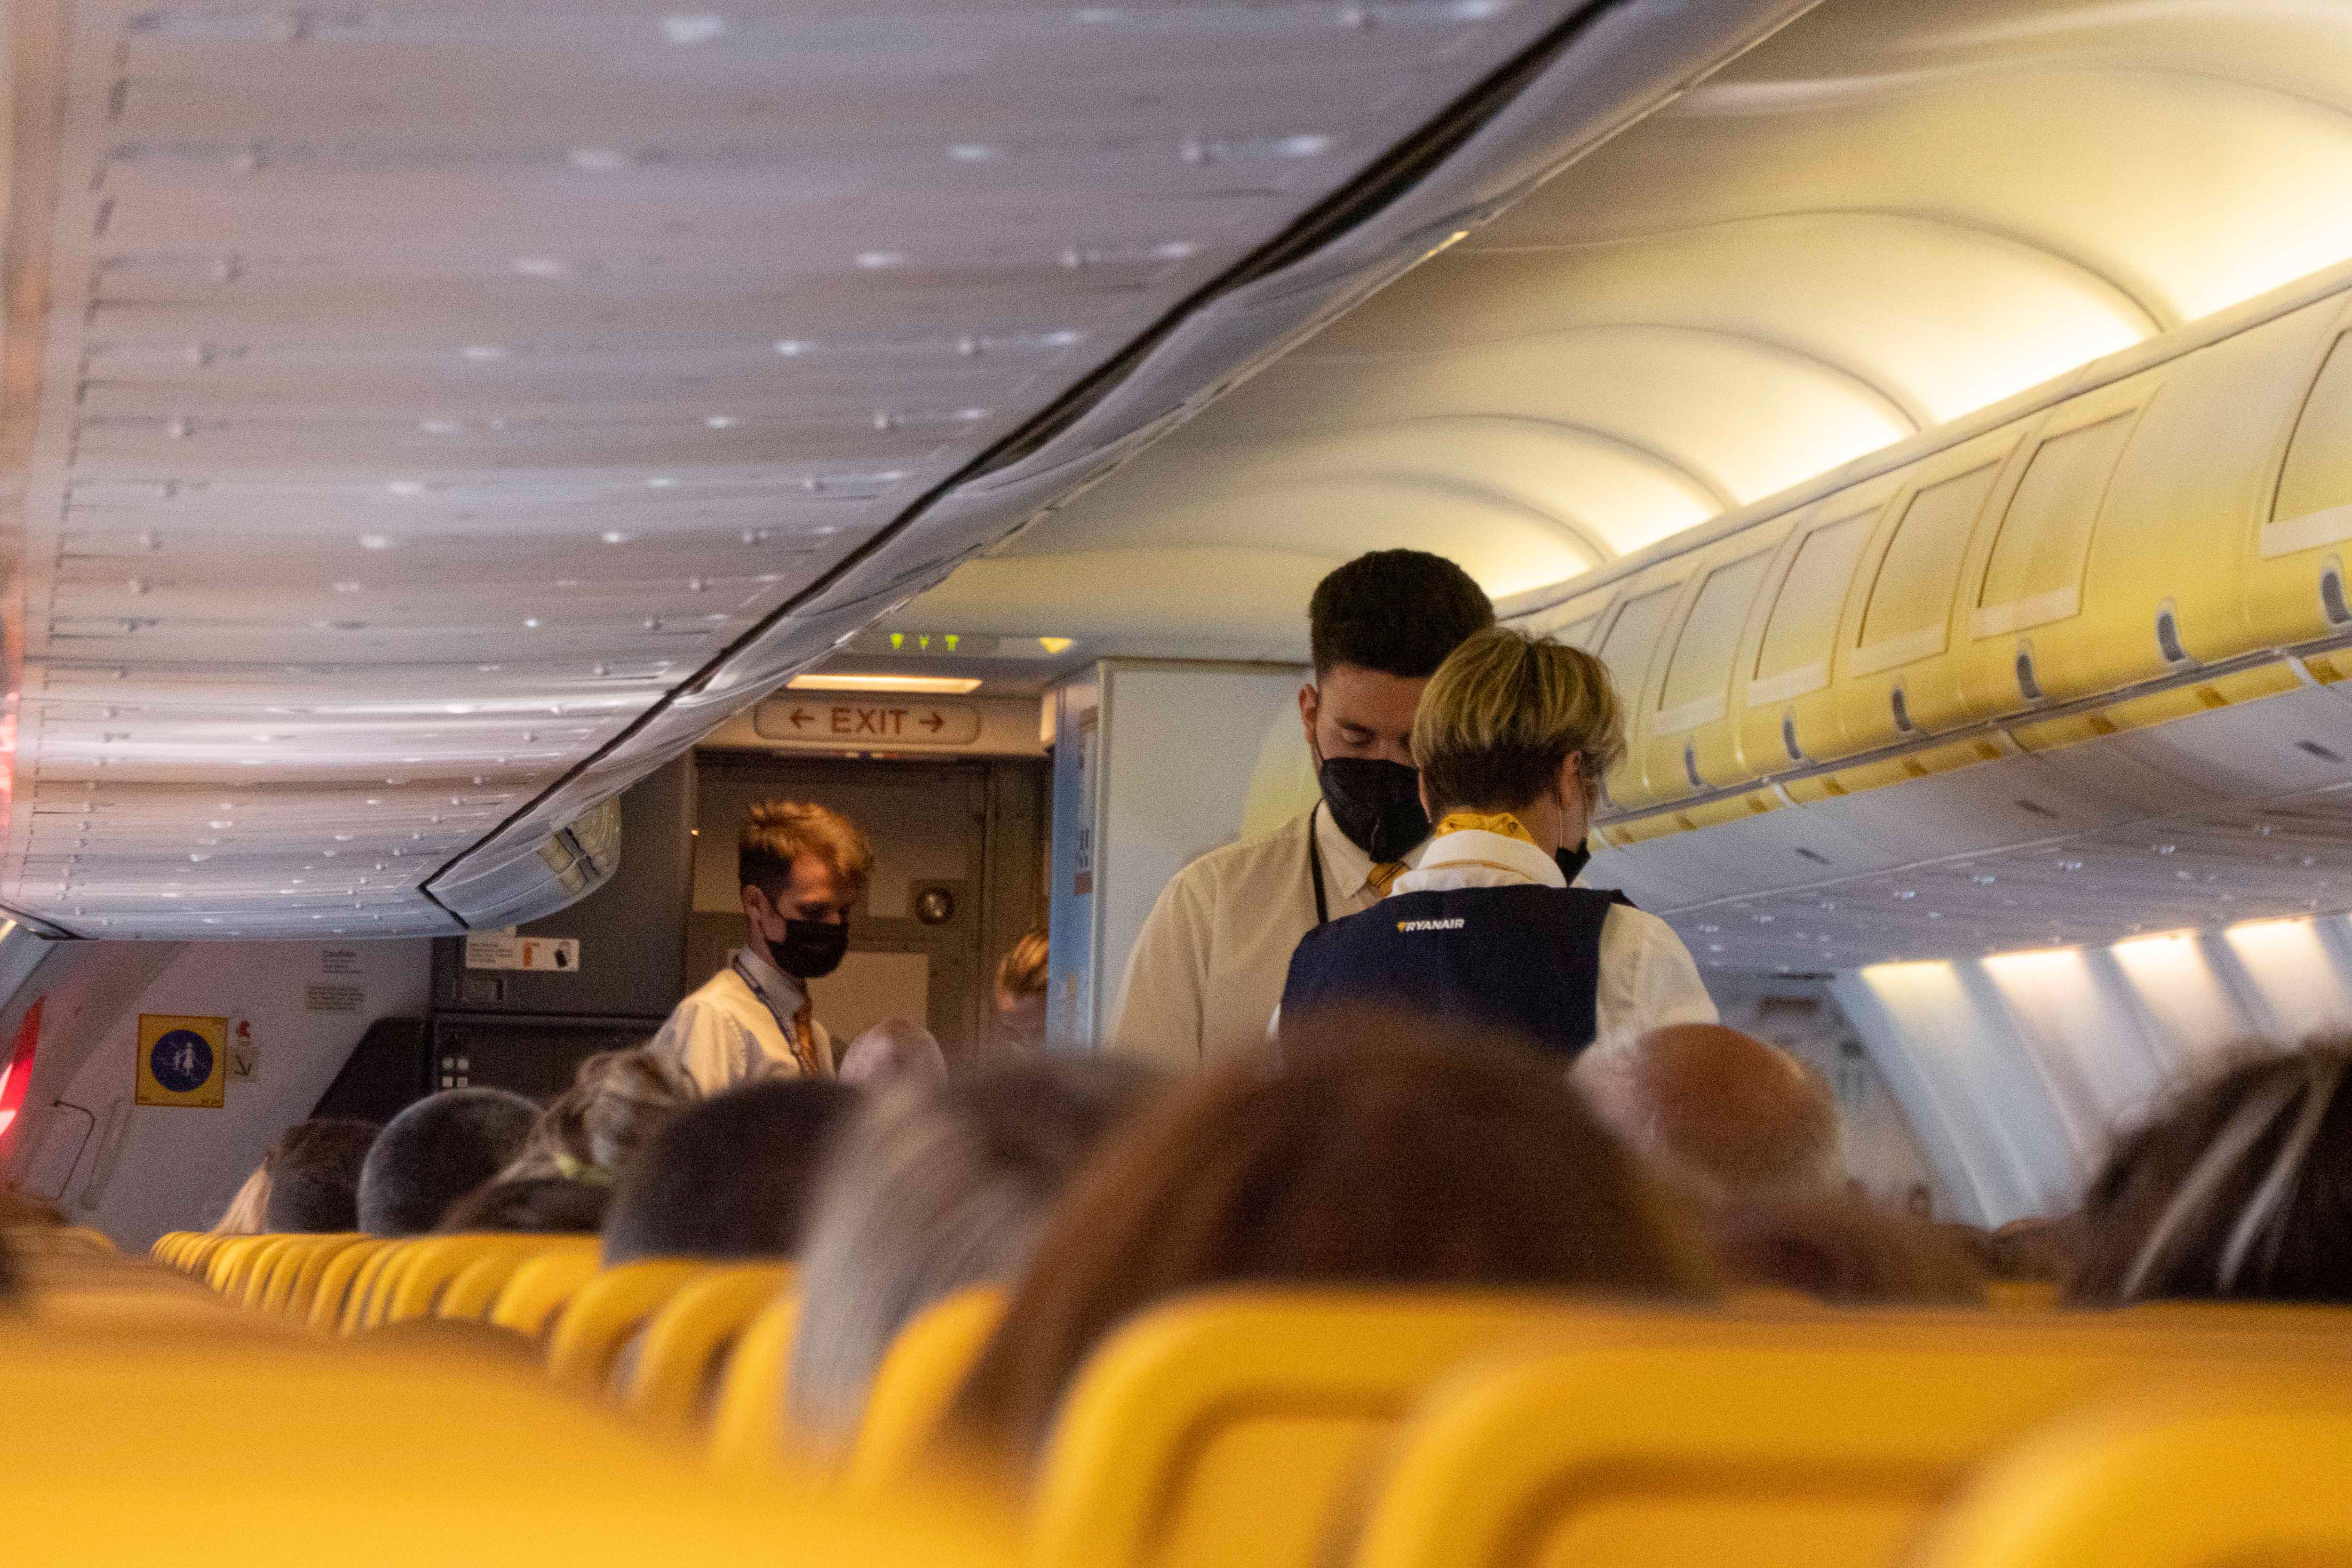 Cabin crew walking along the aisle serving 